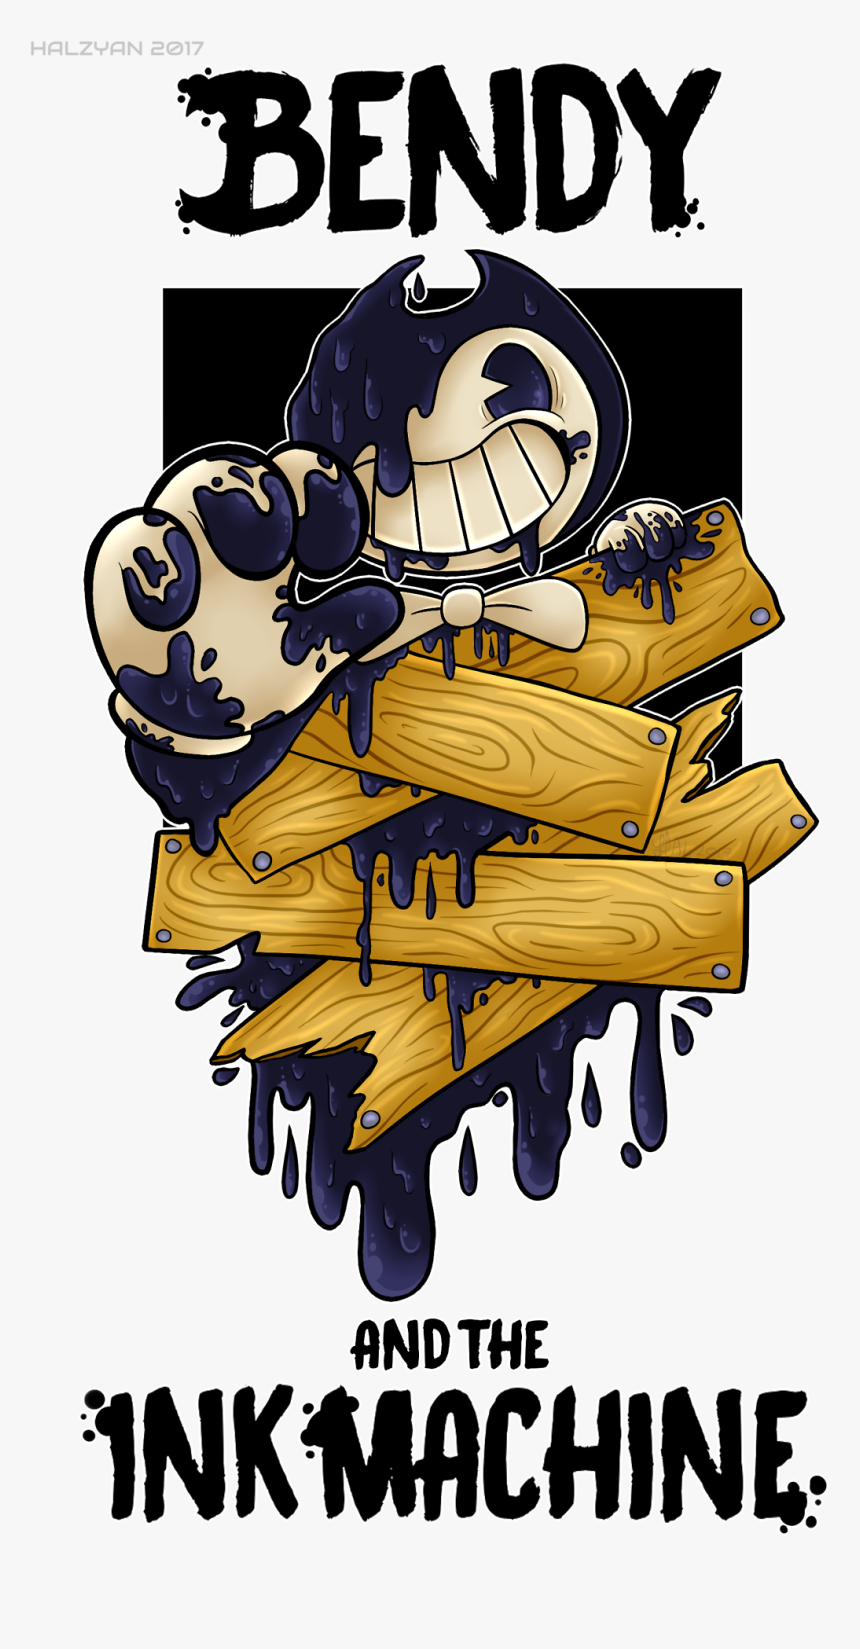 Bendy And The Ink Machine Wallpaper iPhone, HD Png And The Ink Machine HD Wallpaper